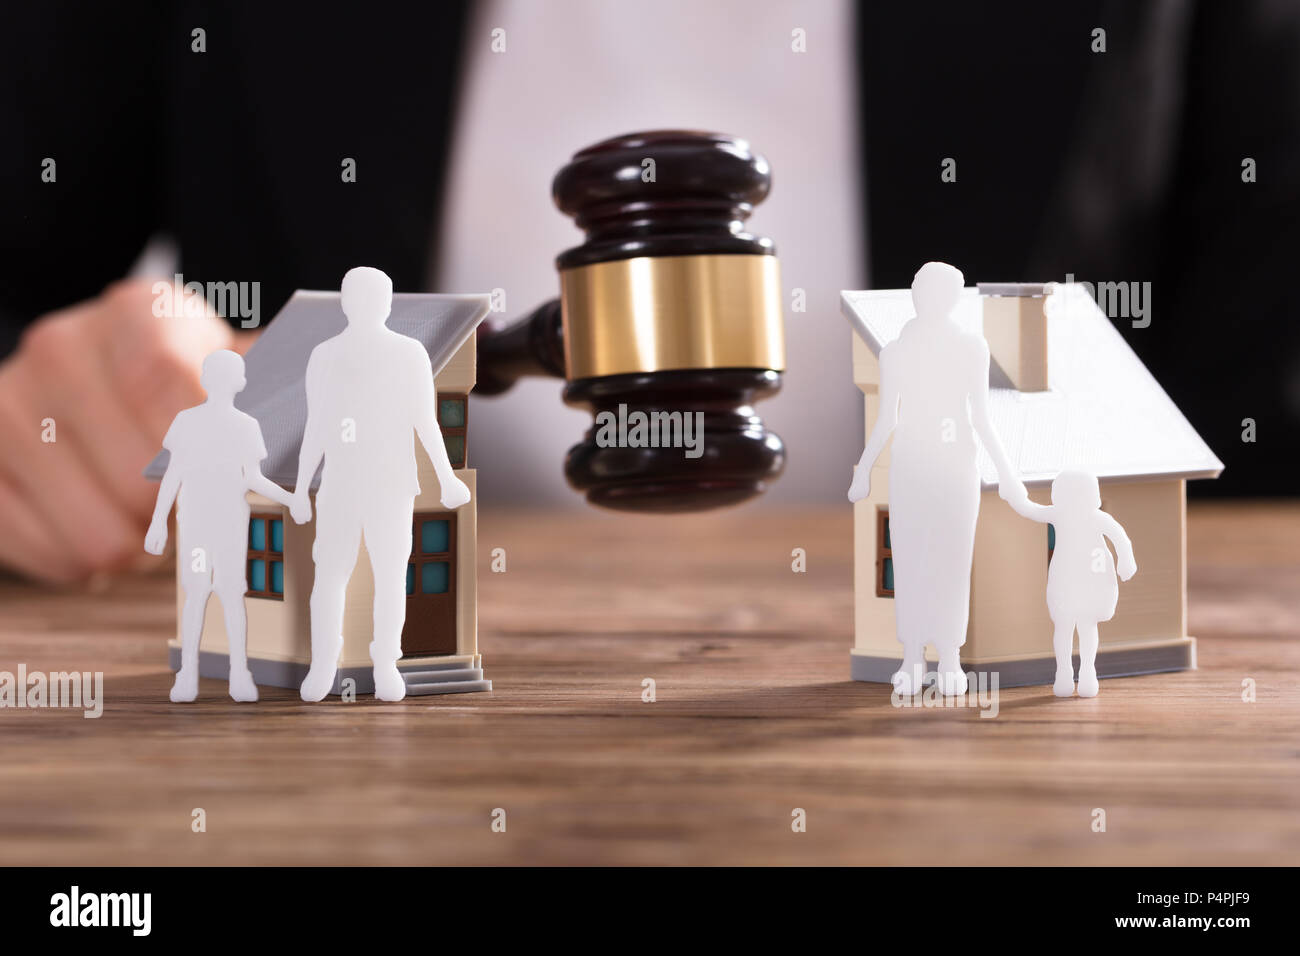 Judge Striking Gavel Between Family Figure Cut Out And Split House Over Wooden Desk Stock Photo